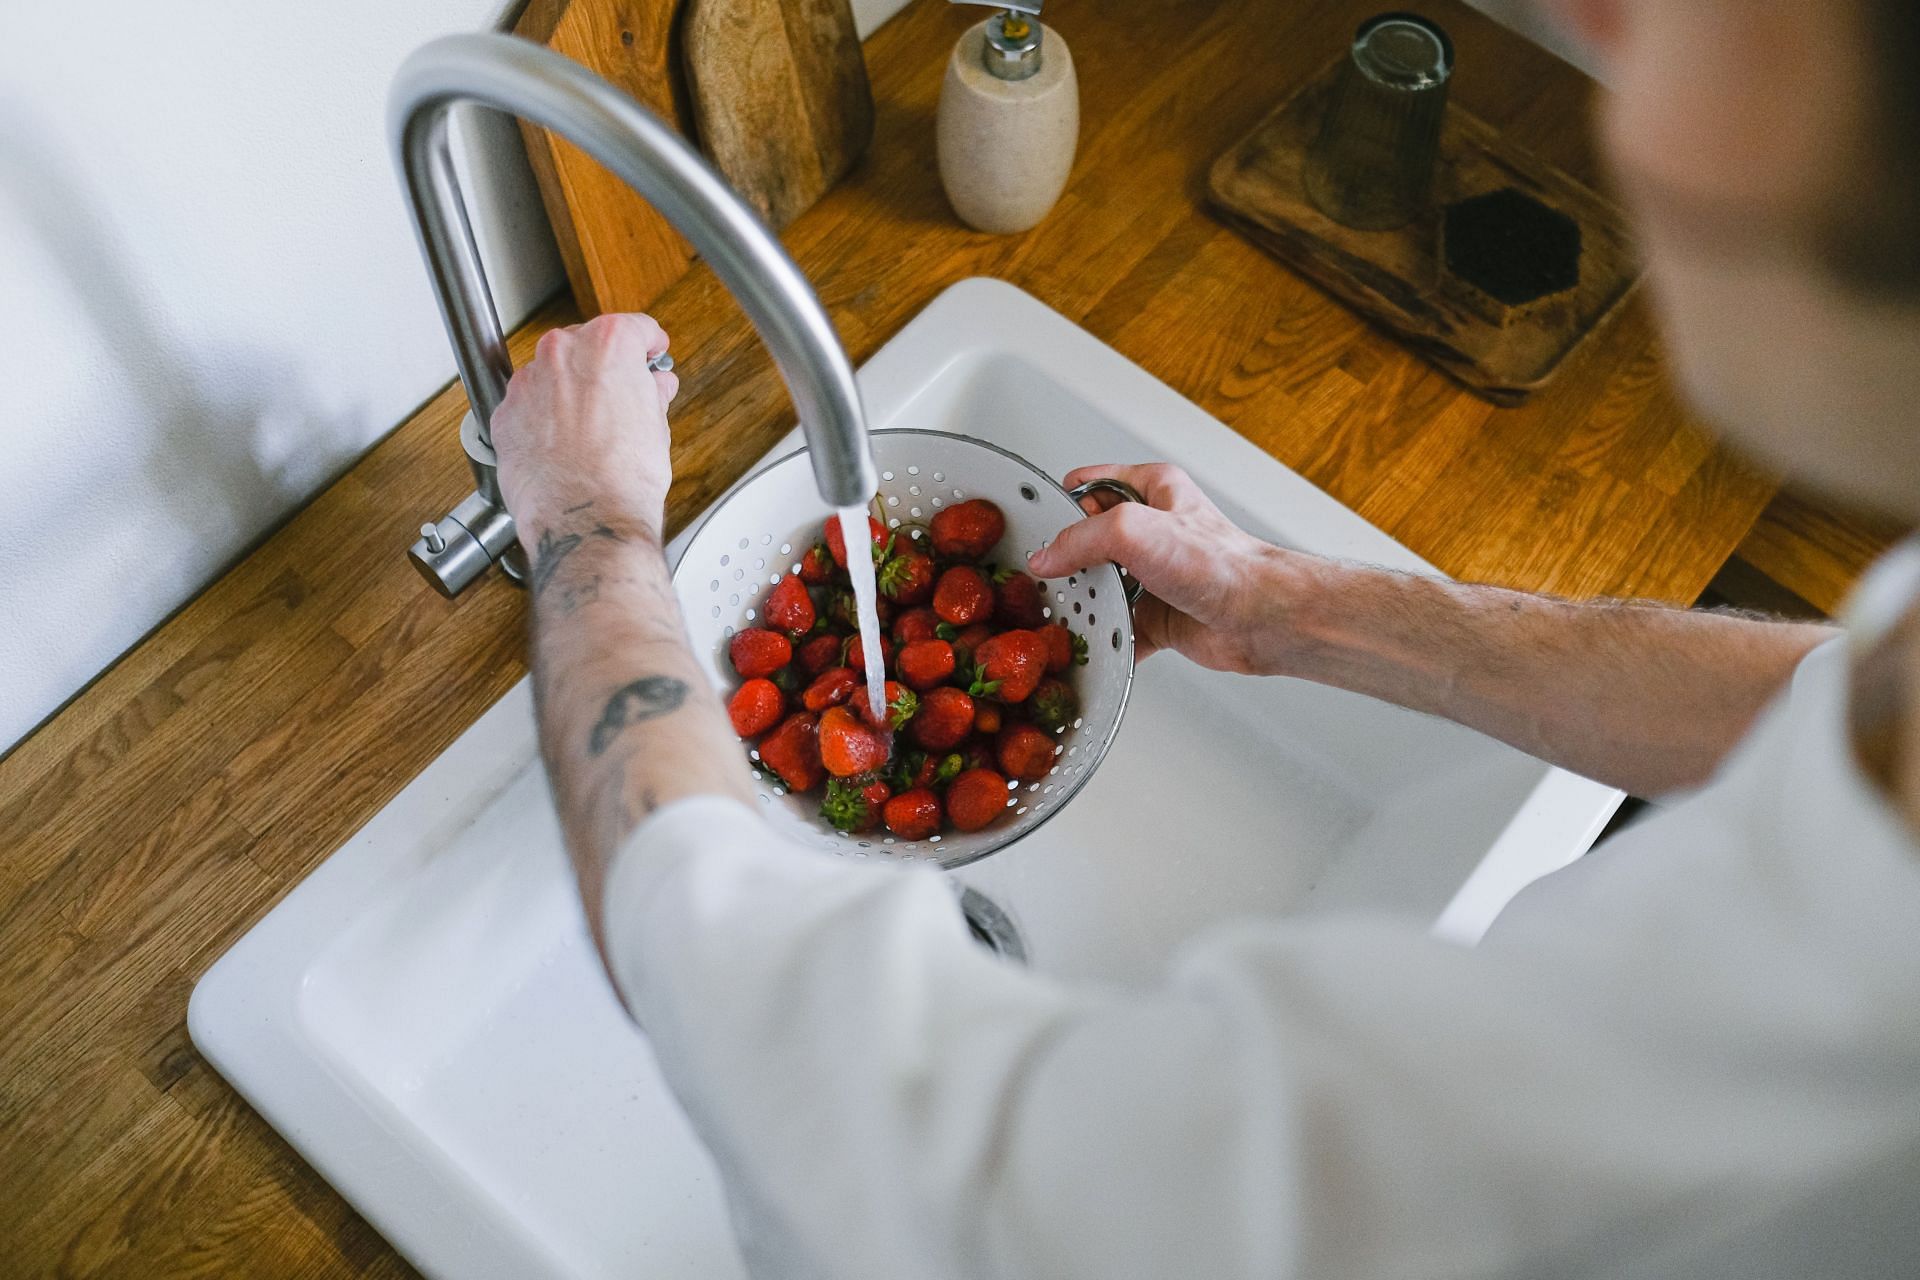 Washing fruits/vegetables and eating local produce can reduce these toxins. (image via pexels / anna shvets)